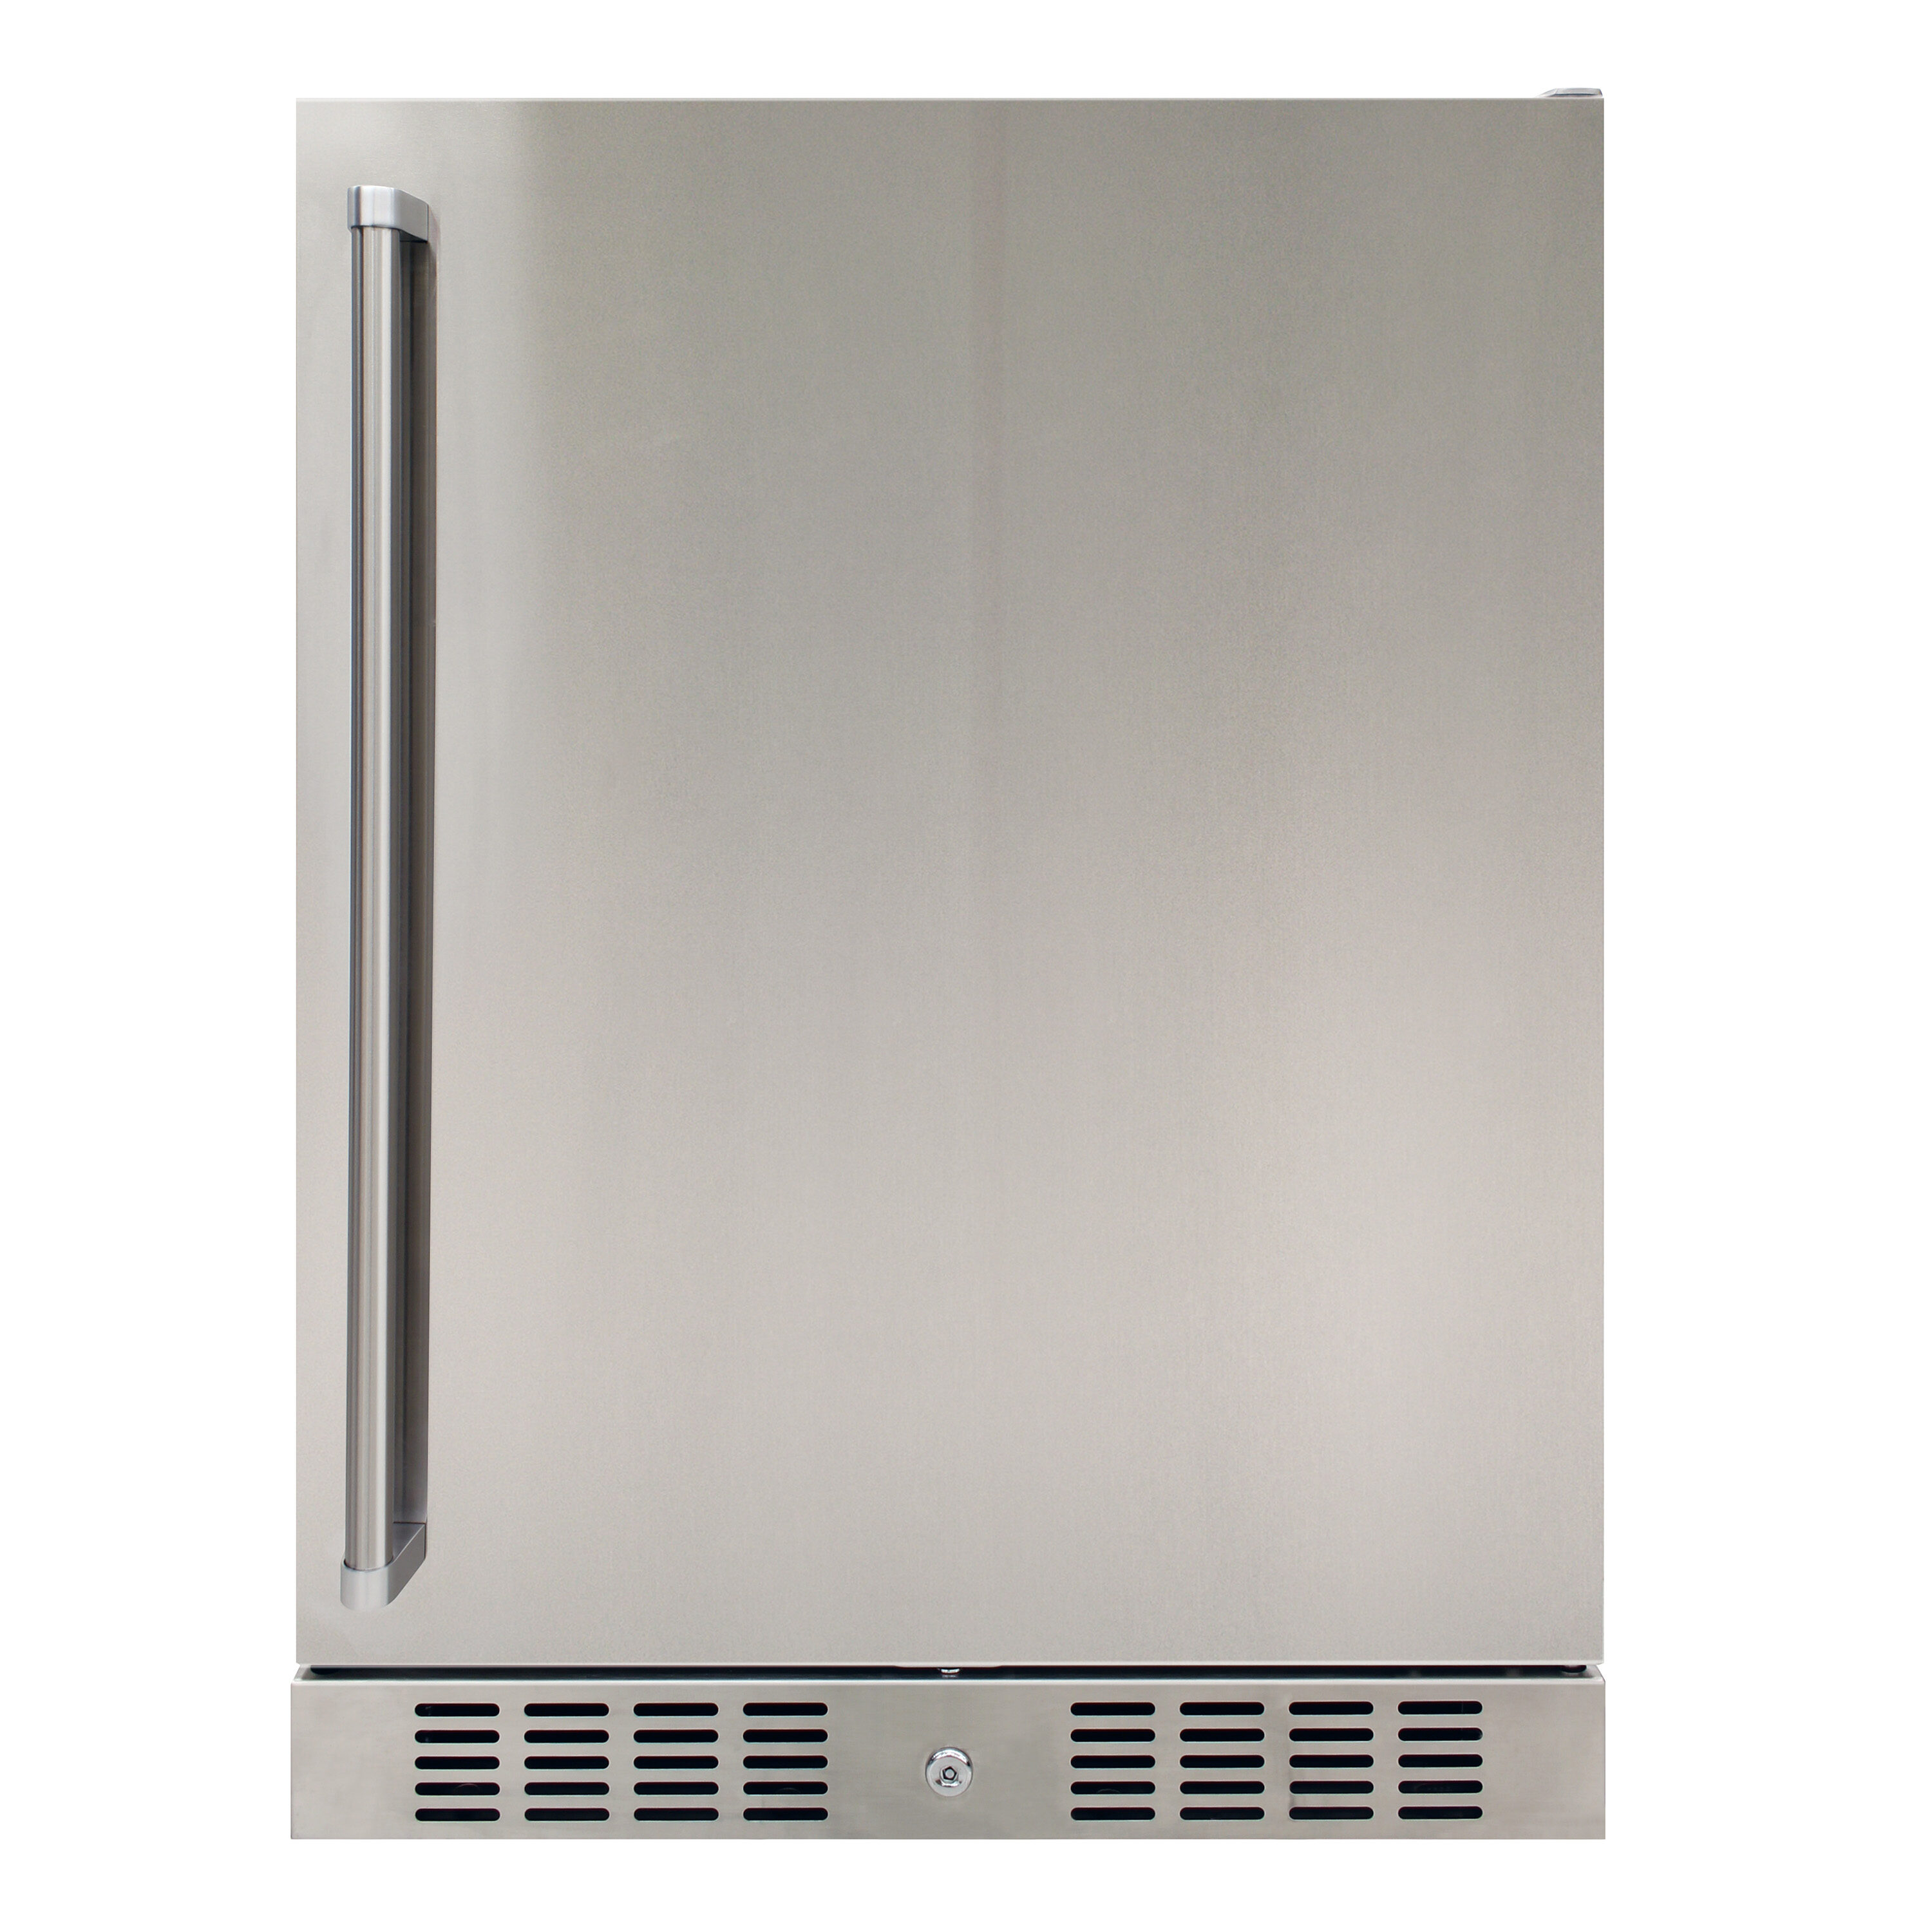 fridge with lock and key, fridge with lock and key Suppliers and  Manufacturers at